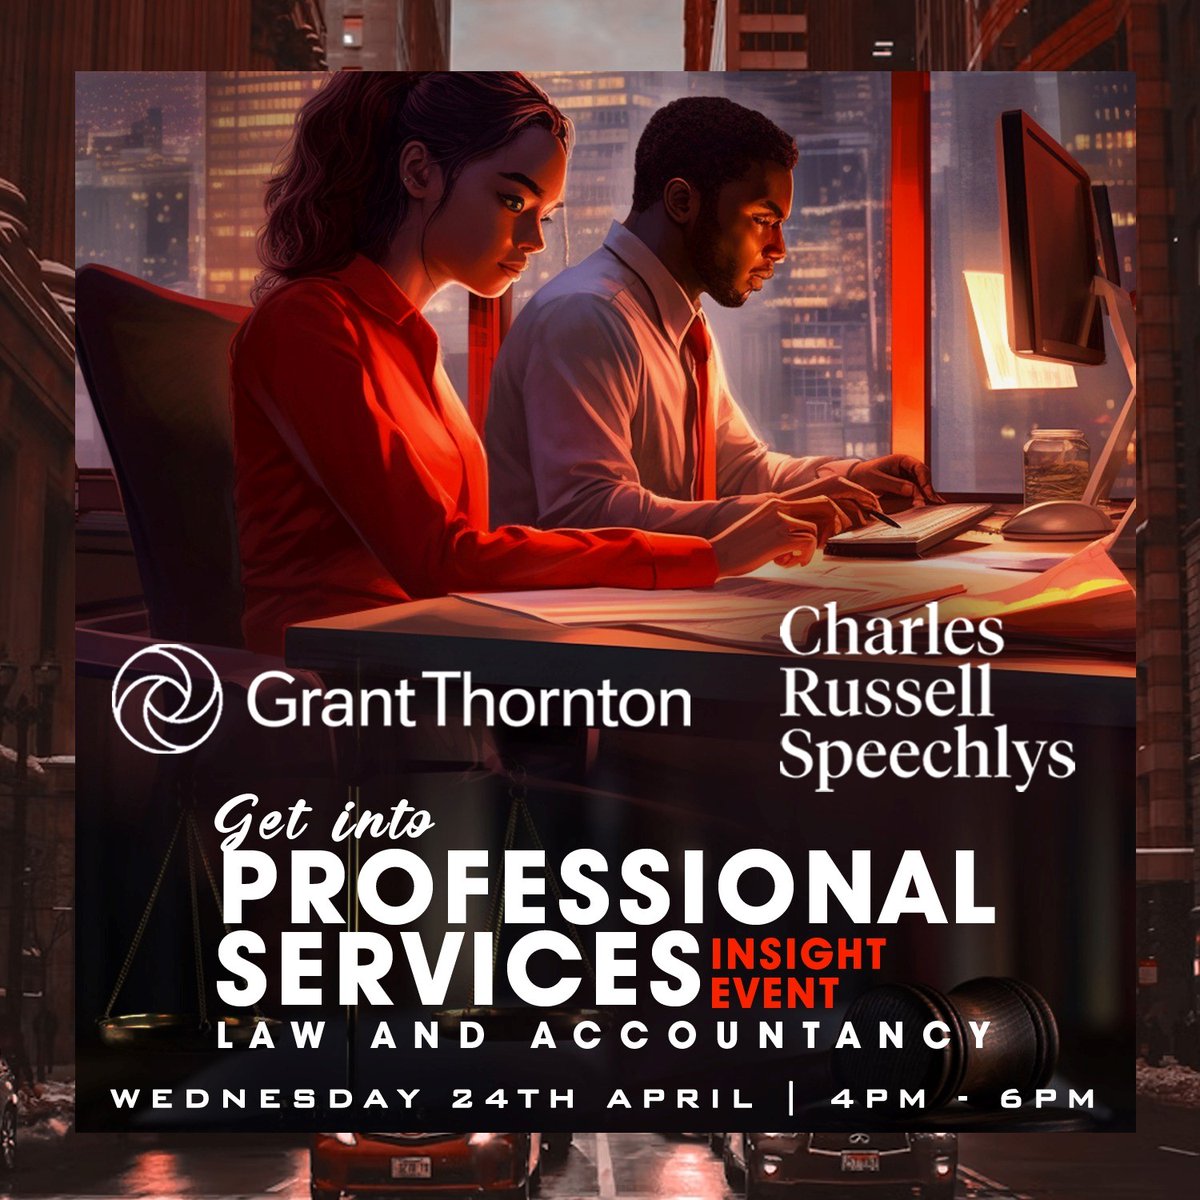 In Year 10-13 and interested in a career in law or accounting? On 24th April 4-6pm join @youngprouk virtual insight event with Law Firm Charles Russell Speechlys & Accounting Firm Grant Thornton to hear about their different teams, people and jobs sign up surveymonkey.com/r/P2P67J3